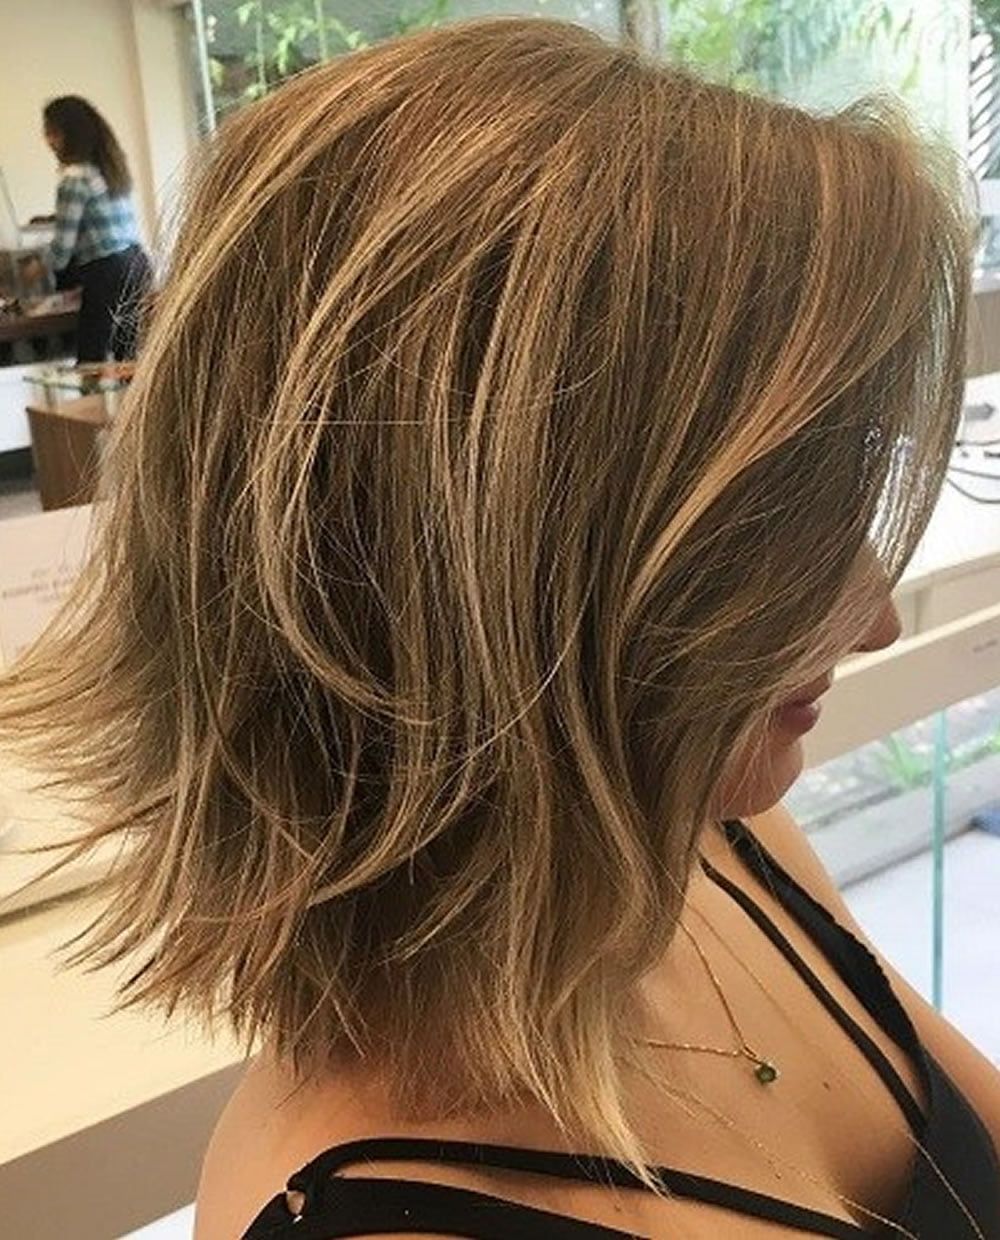 Layered Long Bob Hairstyles And Lob Haircuts 2018 – Hairstyles For Most Recently Released Wavy Textured Haircuts With Long See Through Bangs (View 19 of 20)